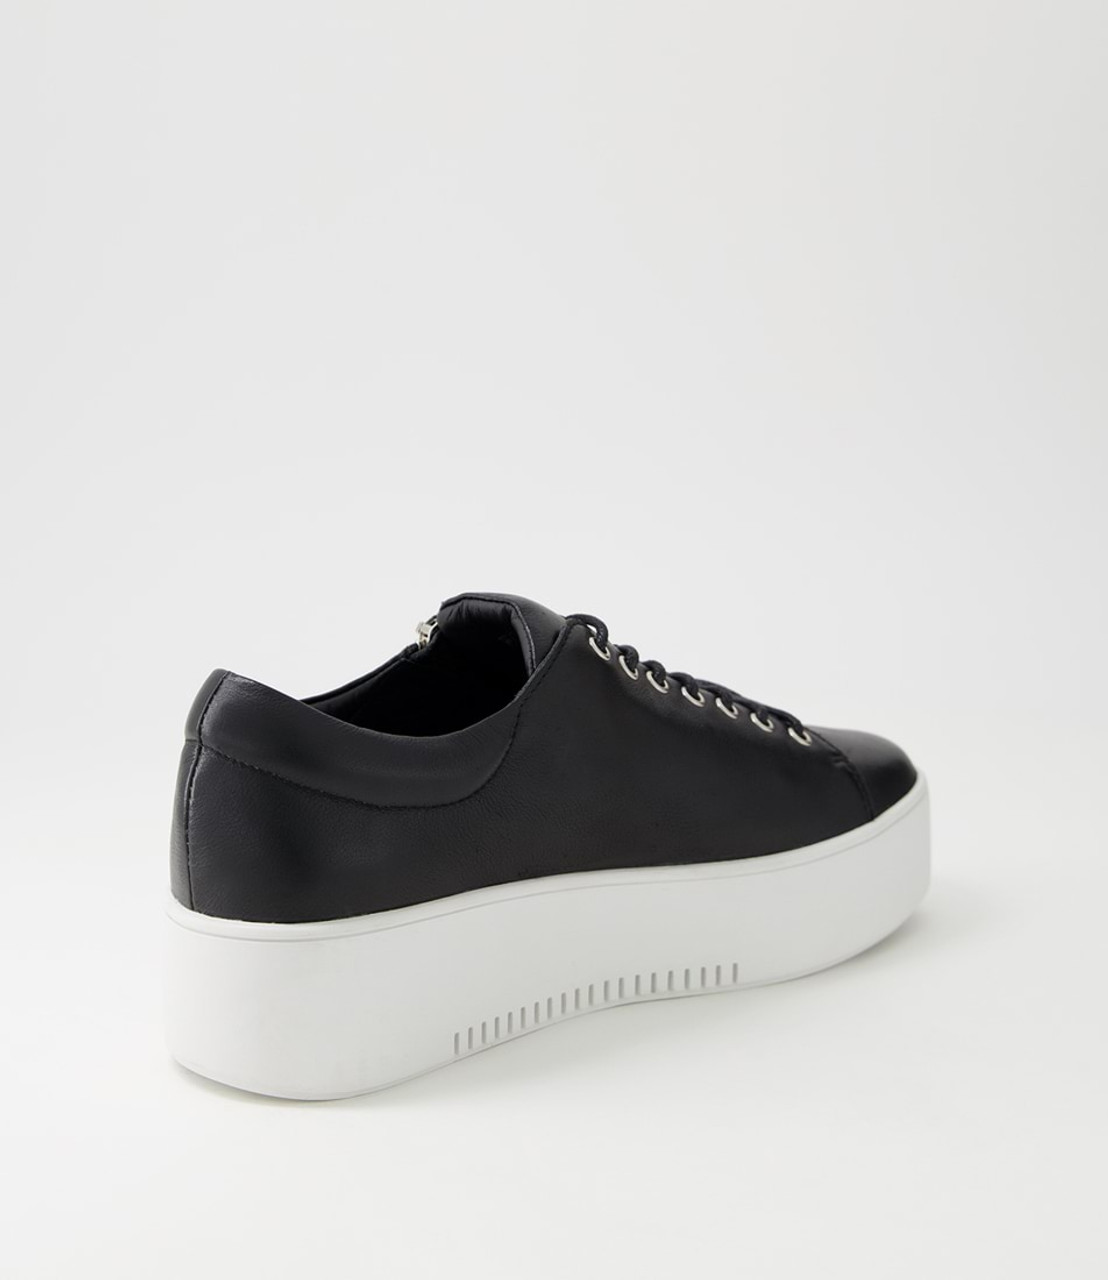 Wolfie Black White Leather Sneakers - Django and Juliette